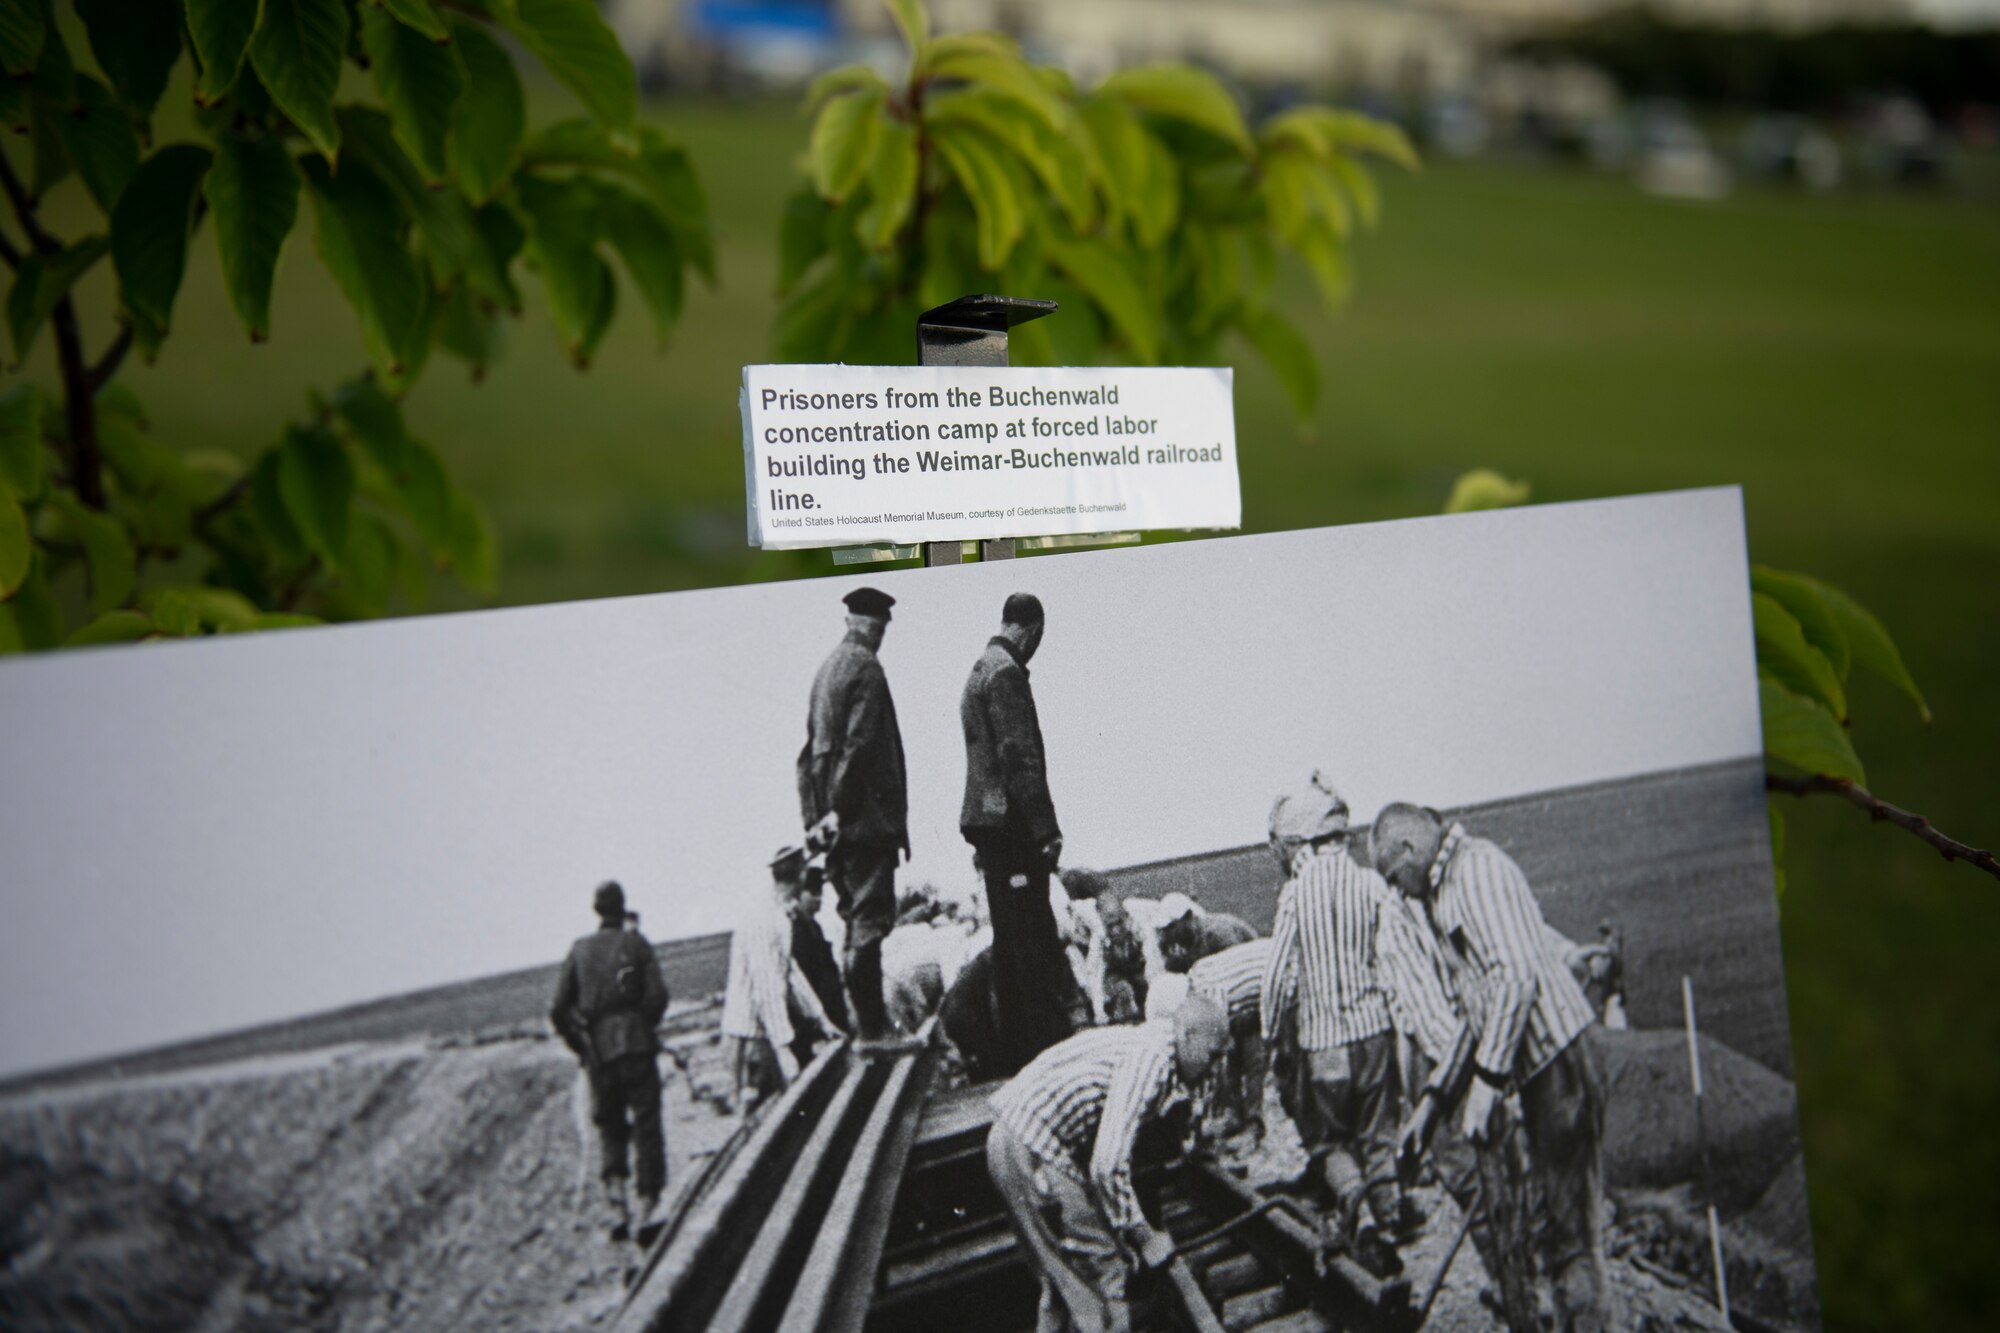 Photos and information pertaining to Holocaust events are displayed during the Days of Remembrance week silent walk at Kadena Air Base, Japan, April 25, 2022. The Nazi’s constructed over 44,000 incarceration sites, including forced labor camps and killing centers. (U.S. Air Force photo by Senior Airman Jessi Monte)